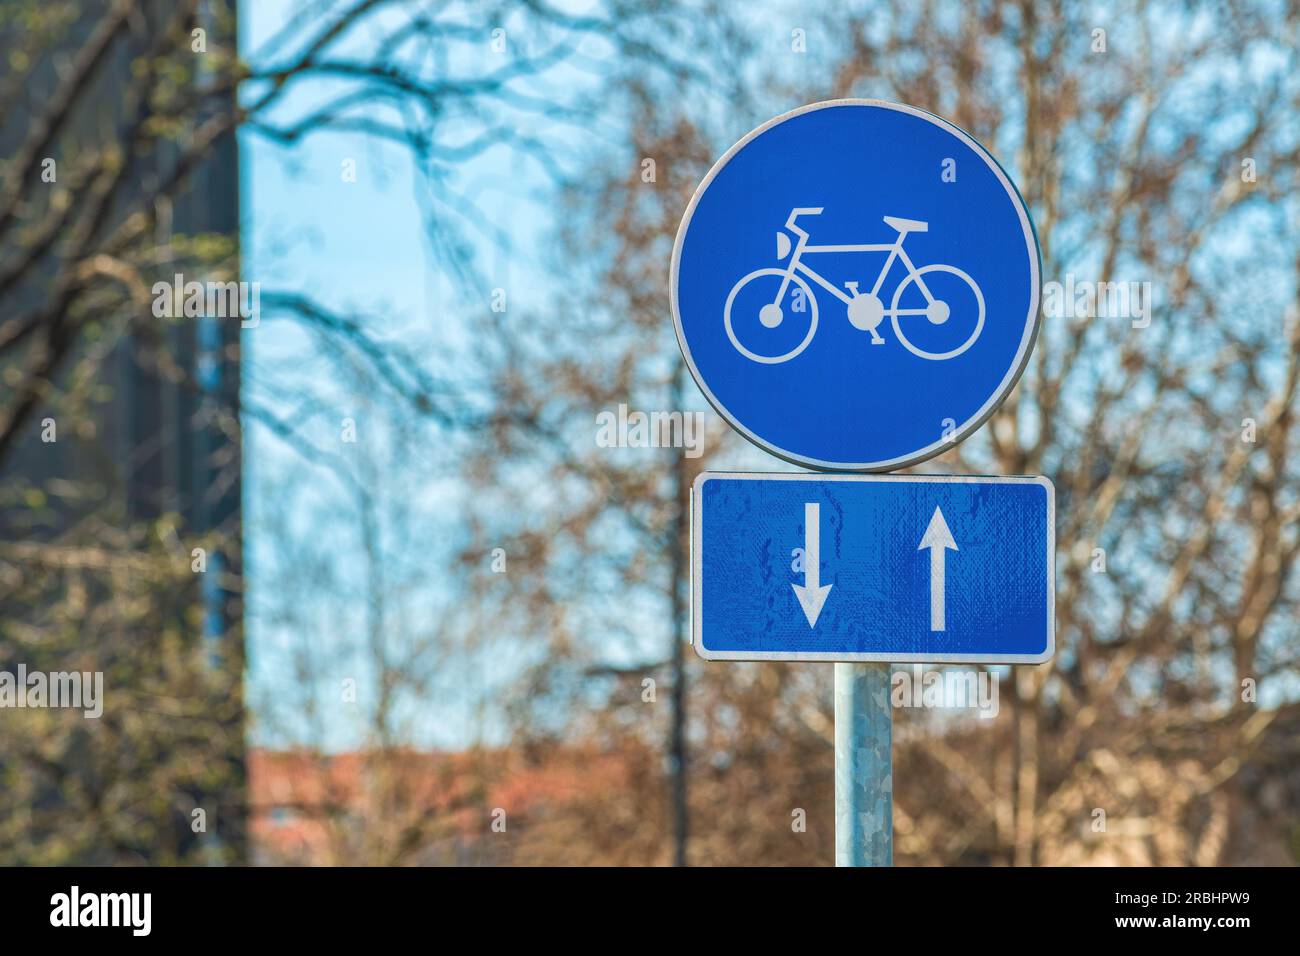 Two way bicycle lane traffic sign at the street, selective focus Stock Photo